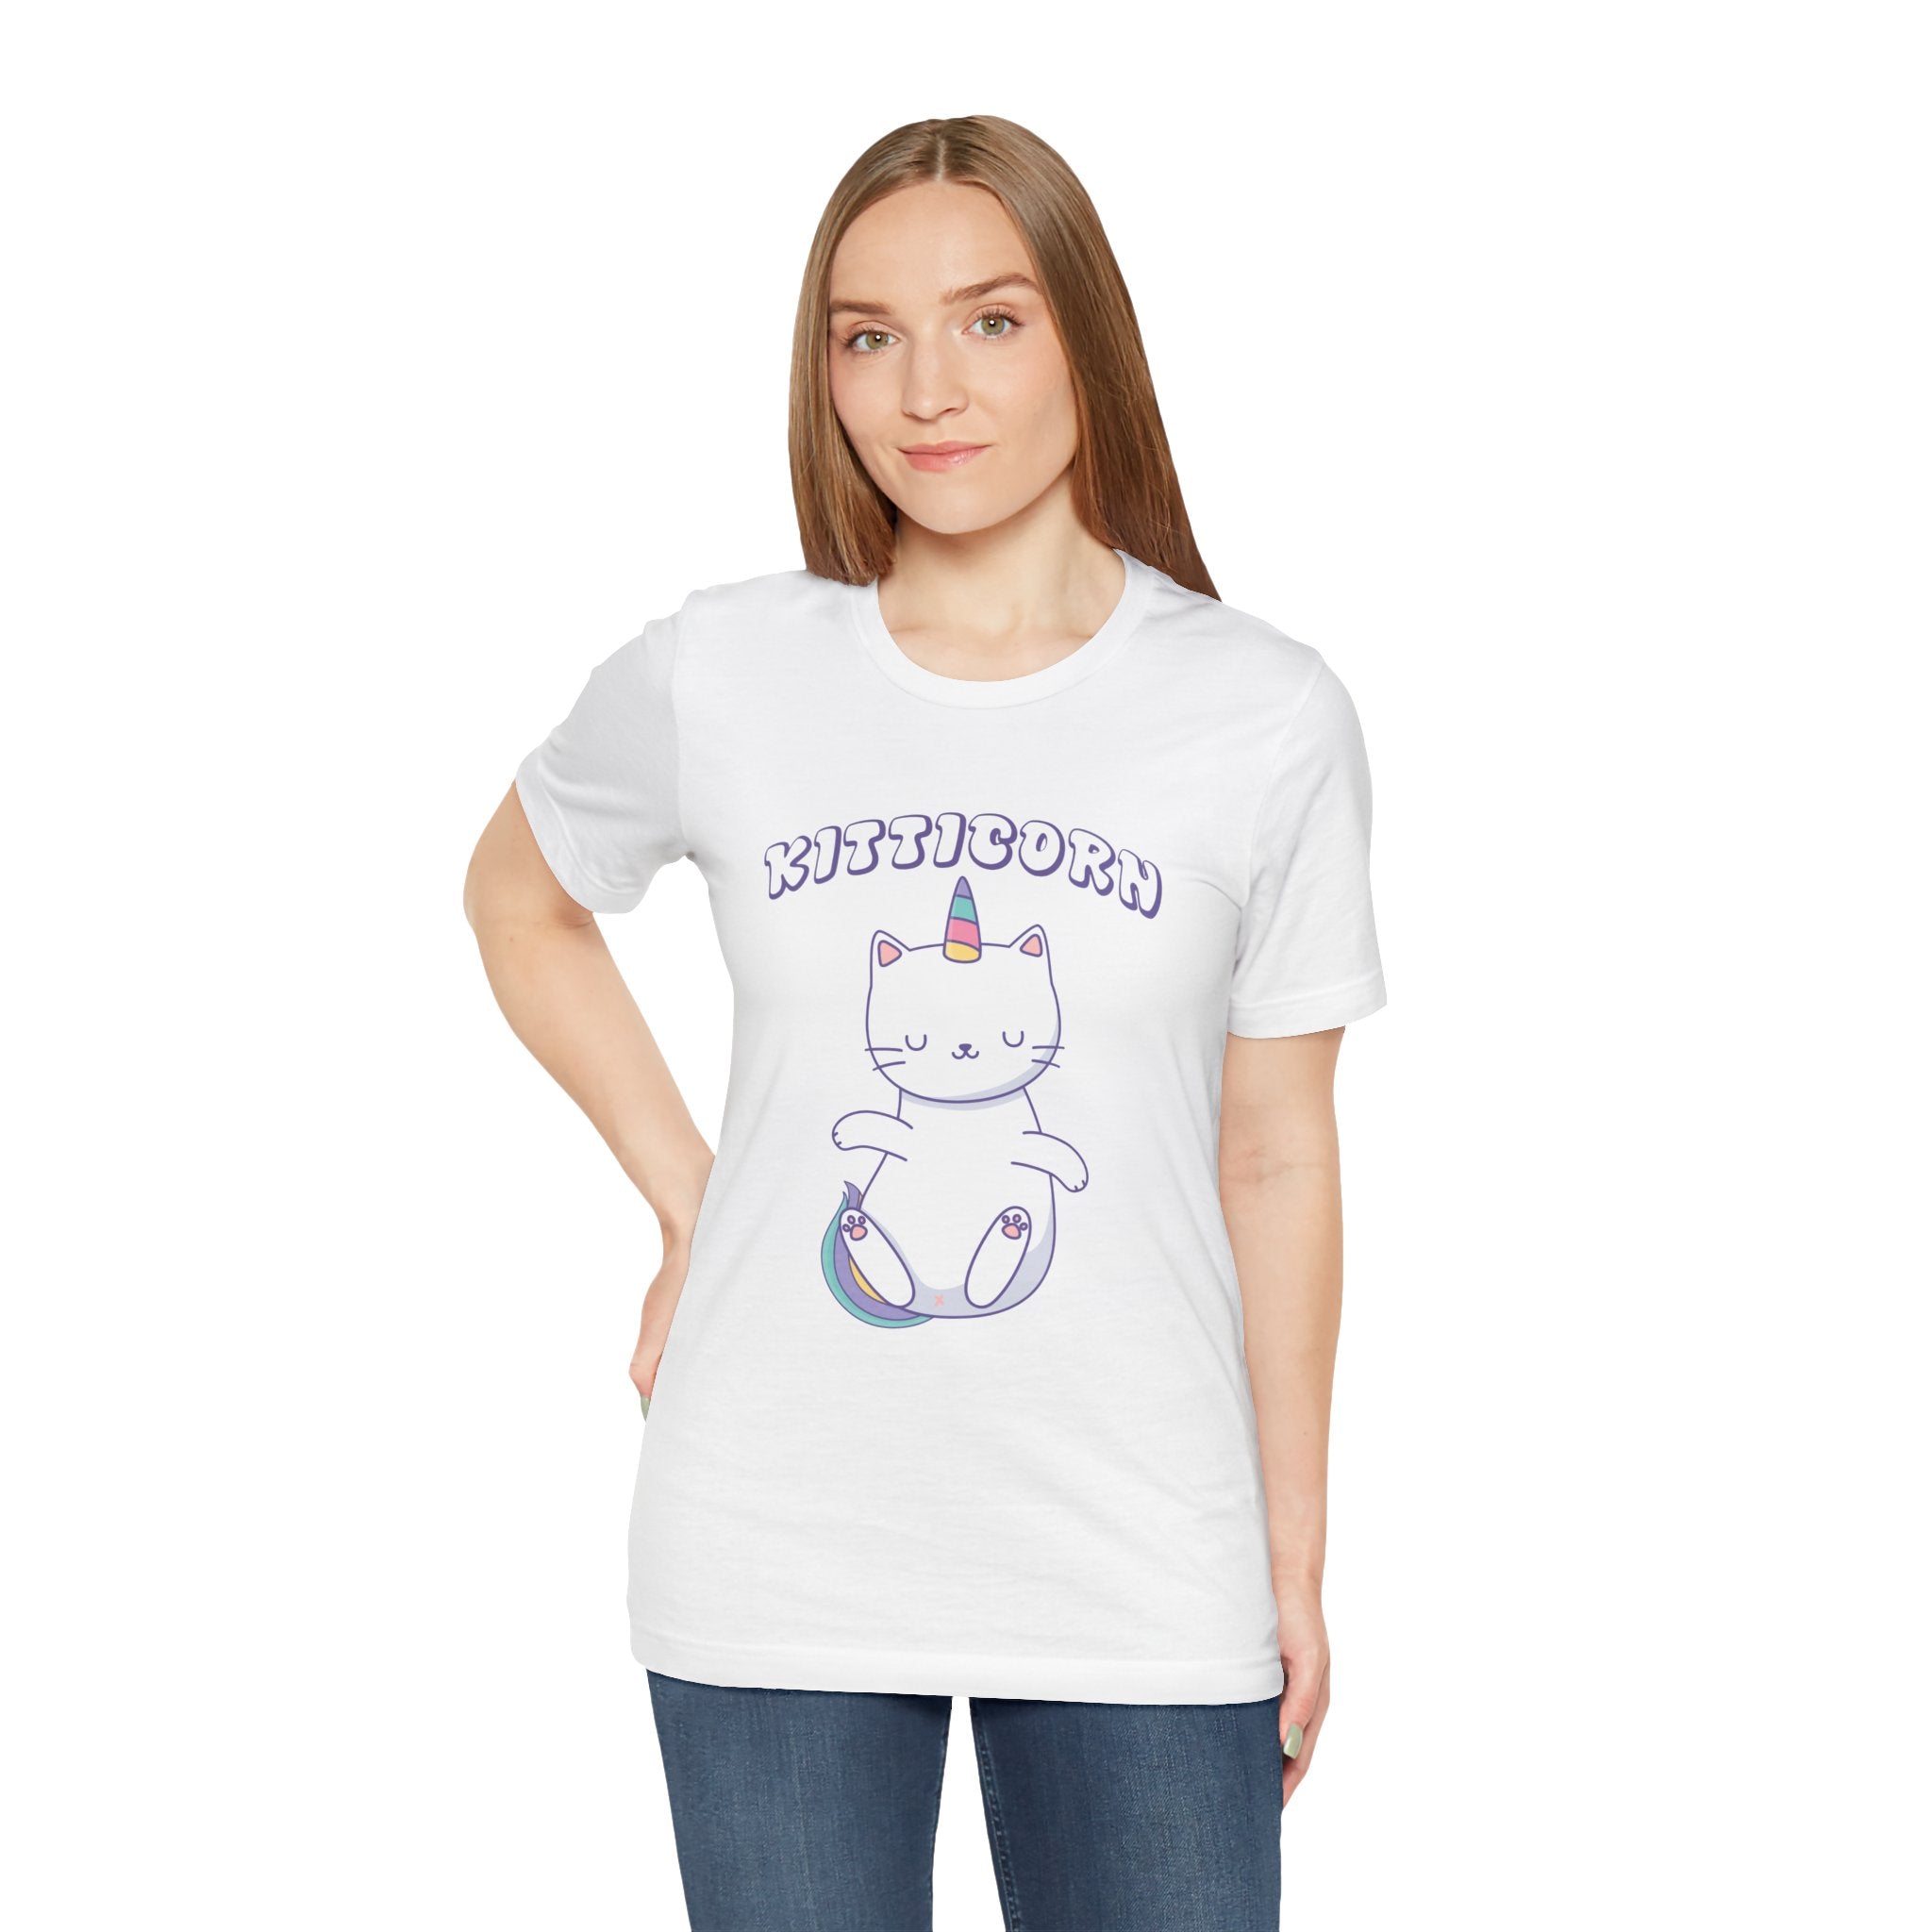 Woman in a white Kitticorn jersey tee with a cartoon cat design, standing against a plain background.